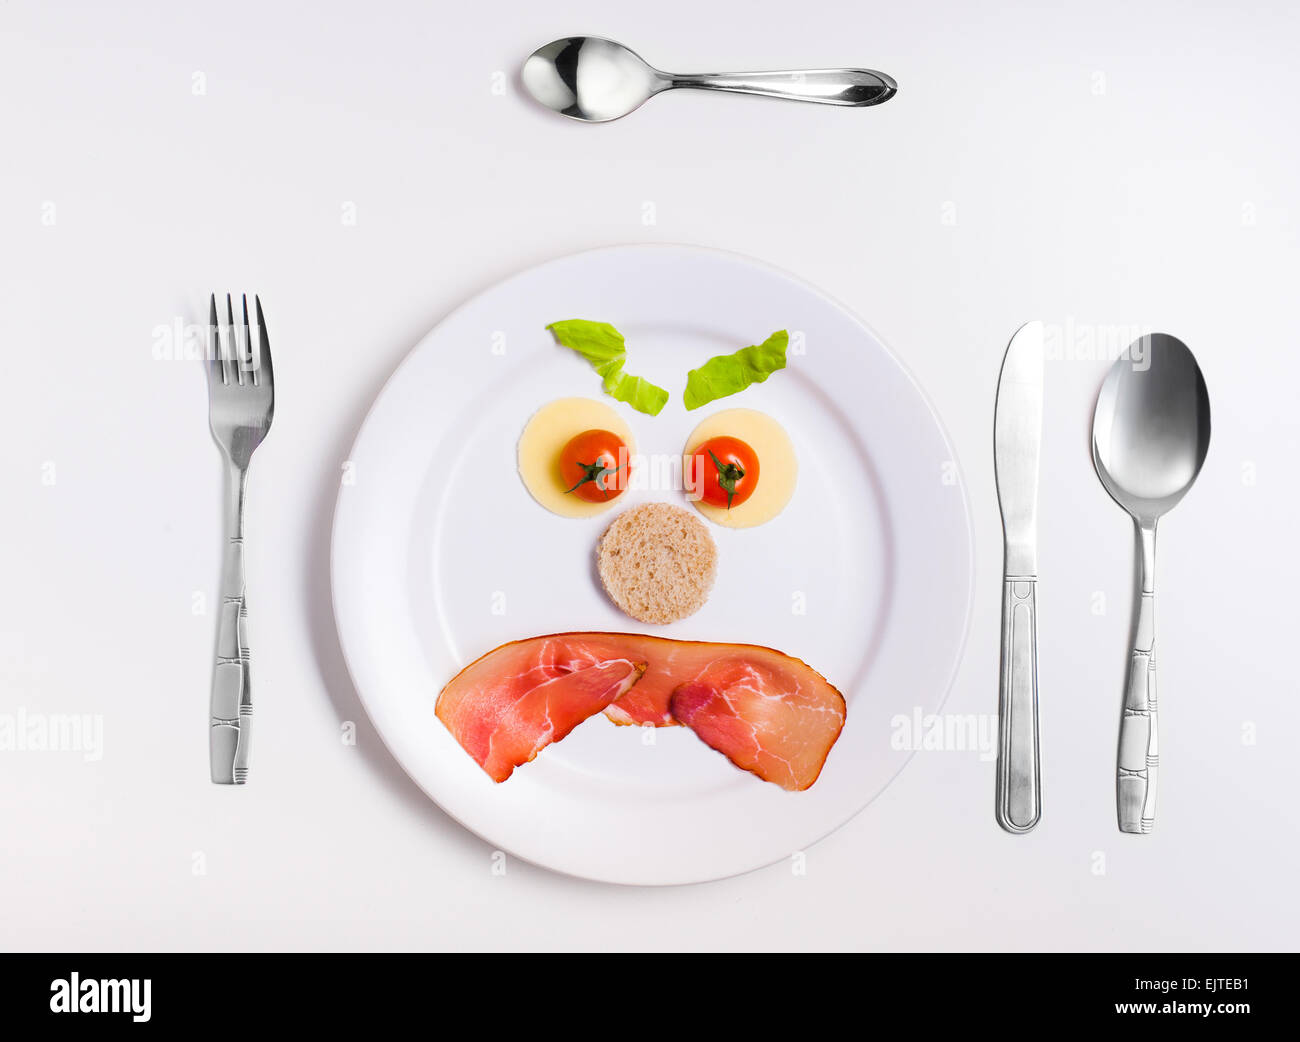 angry emoticon food, made from cheese, tomatoes, bread and ham on a plate with cutlery Stock Photo